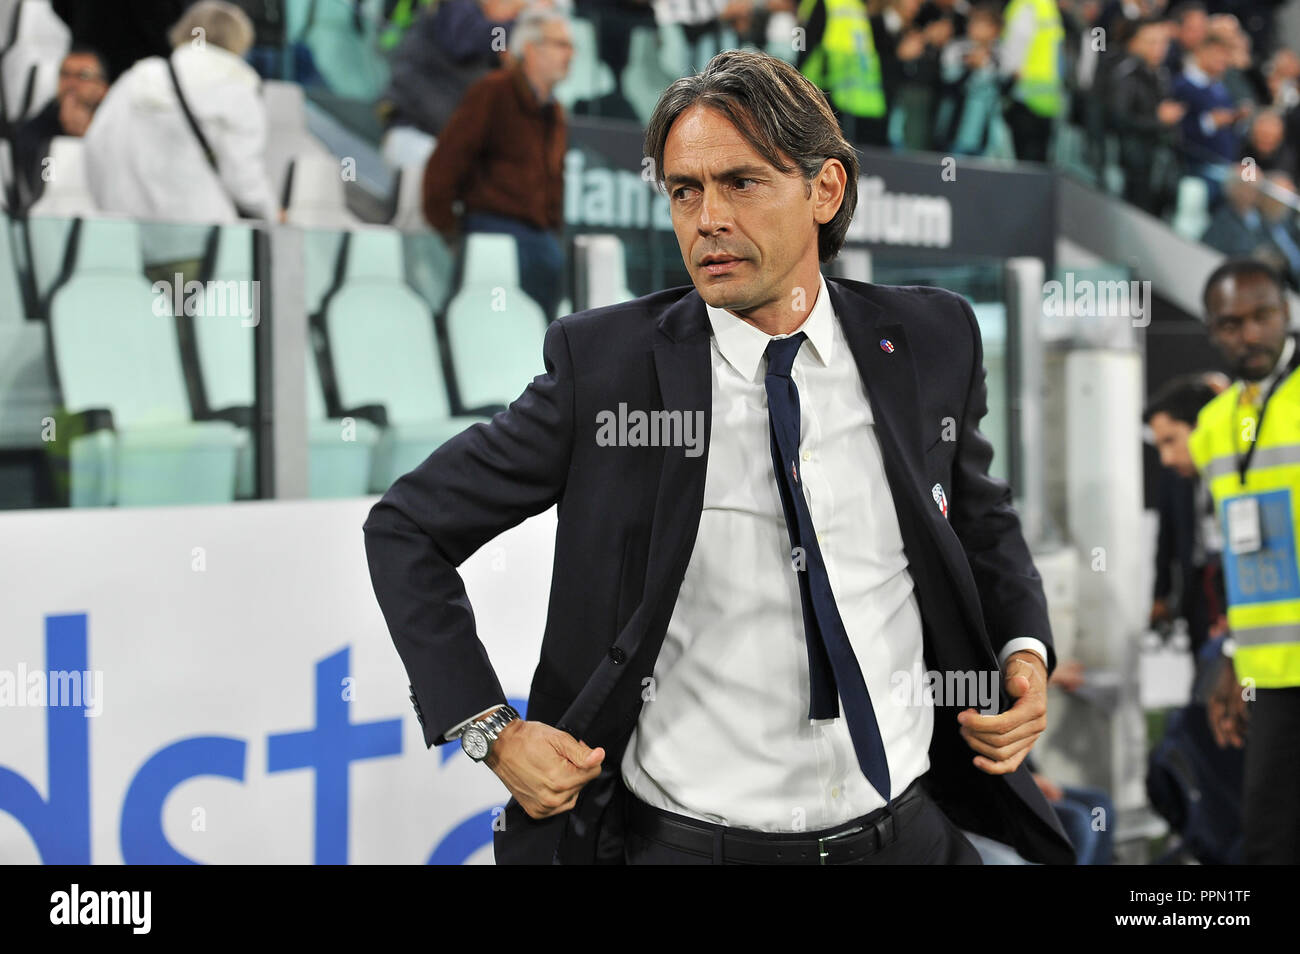 Turin, Italy. 26th September, 2018. Filippo Inzaghi, head coach Bologna FC during the Serie A football match between Juventus FC and Bologna FC at Allianz Stadium on 26th September, 2018 in Turin, Italy. Credit: FABIO PETROSINO/Alamy Live News Stock Photo